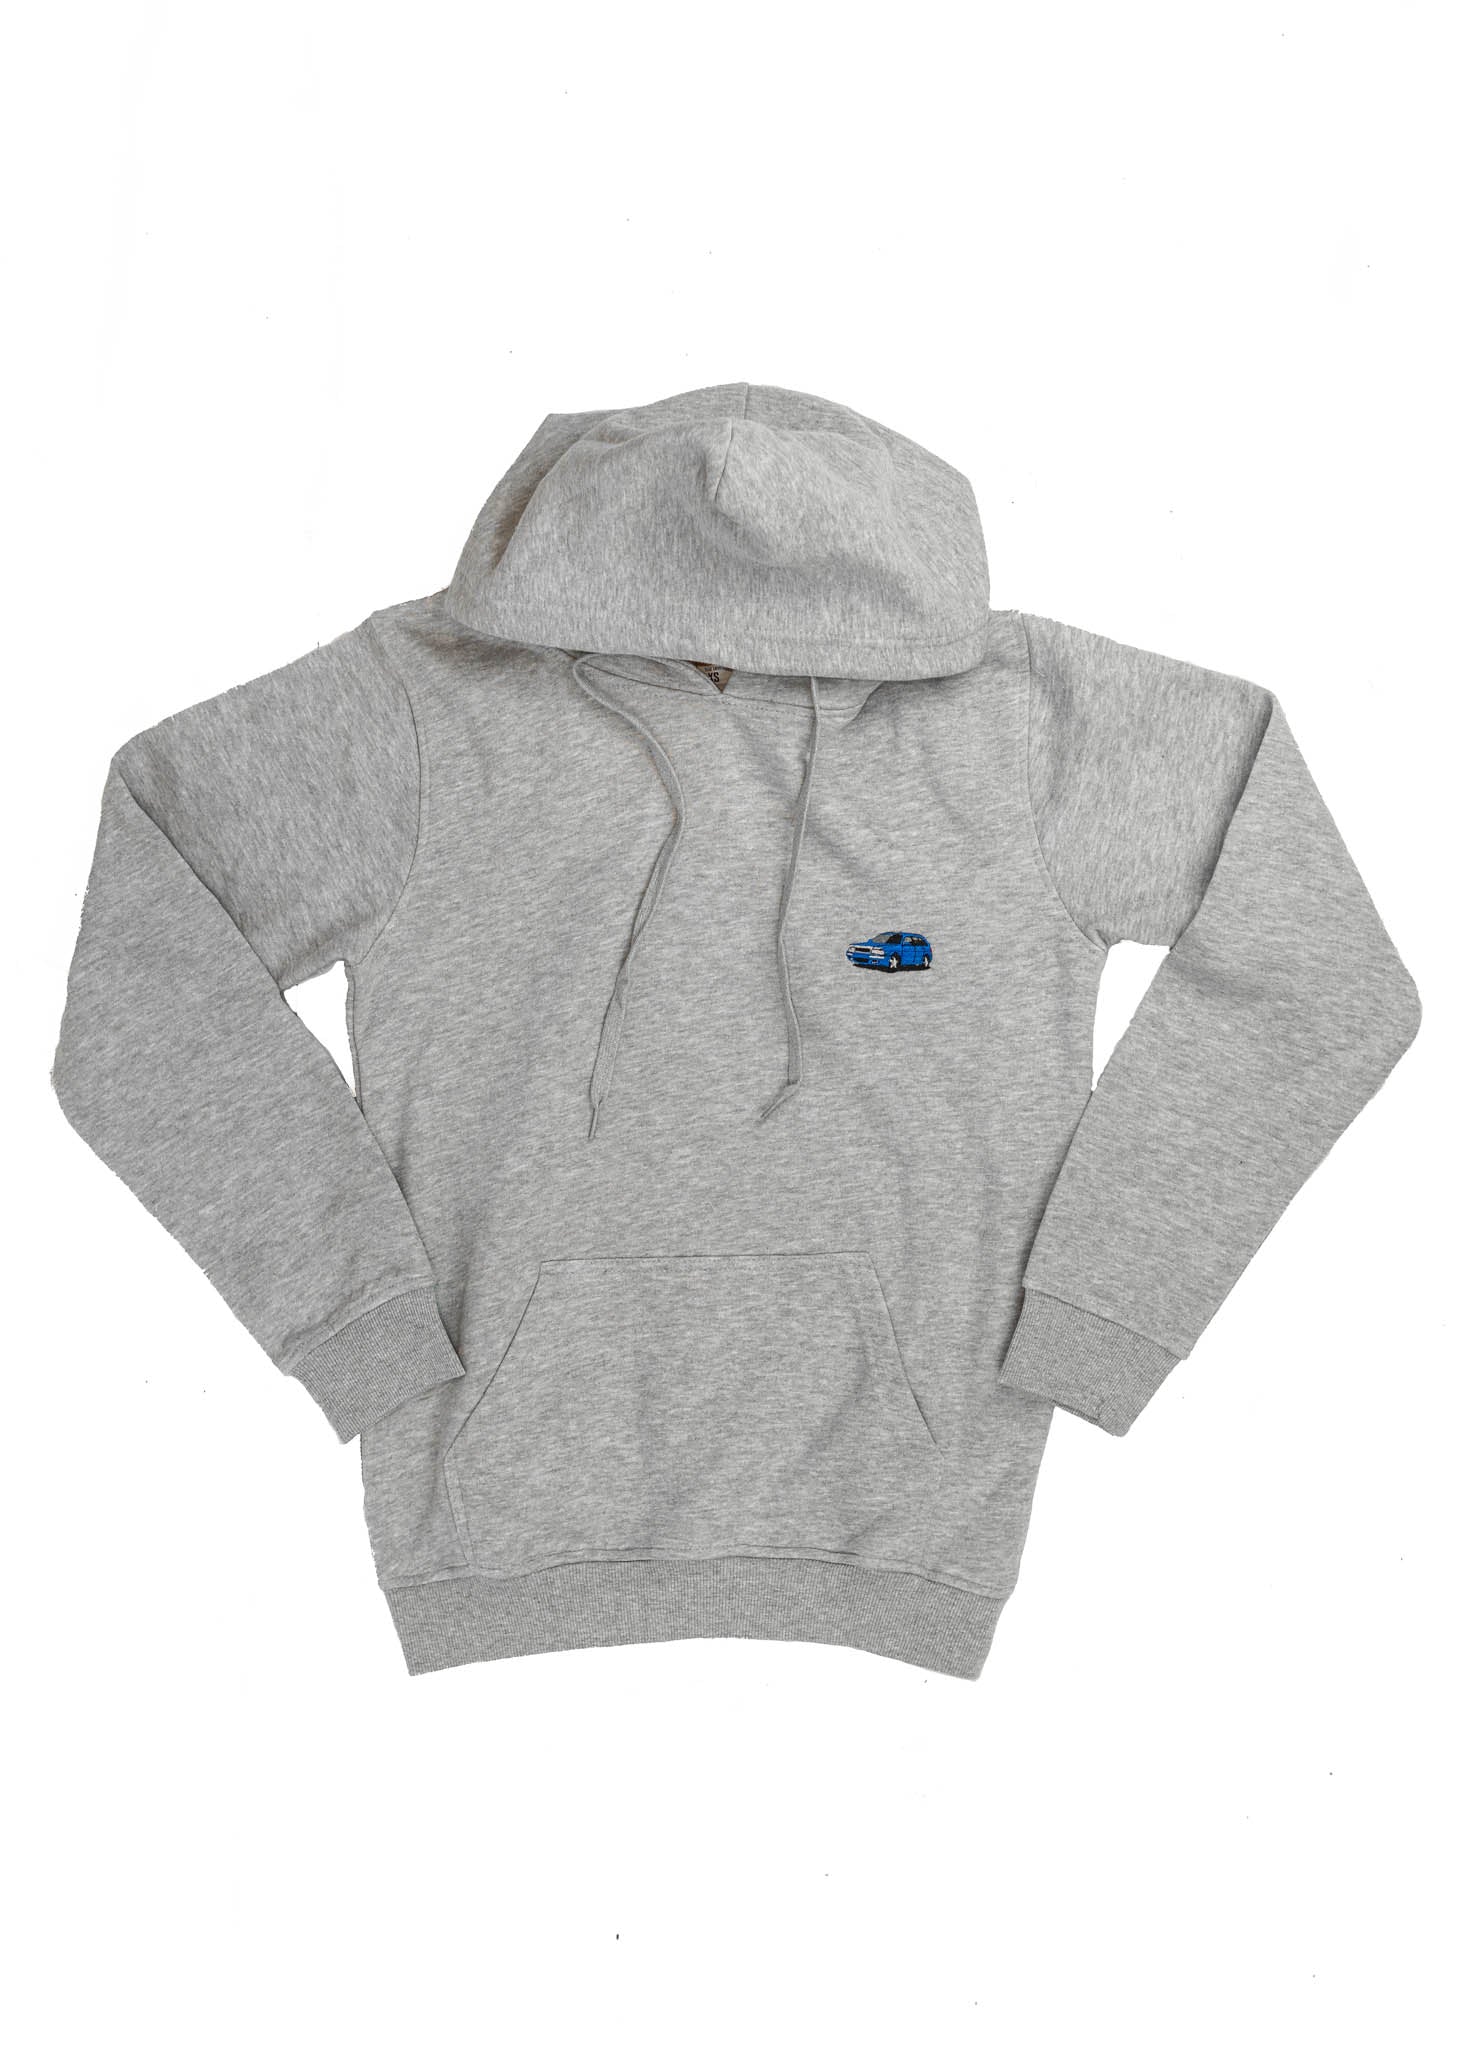 A grey Audi unisex hoodie for men and women. Photo is a front view of the sweater with an embroidered Nogaro Blue Audi 80 RS2 Avant made by Porsche. Fabric composition is cotton, polyester, and rayon. The material is very soft, stretchy, and non-transparent. The style of this hoodie is long sleeve, crewneck with a hood, hooded, with embroidery on the left chest.